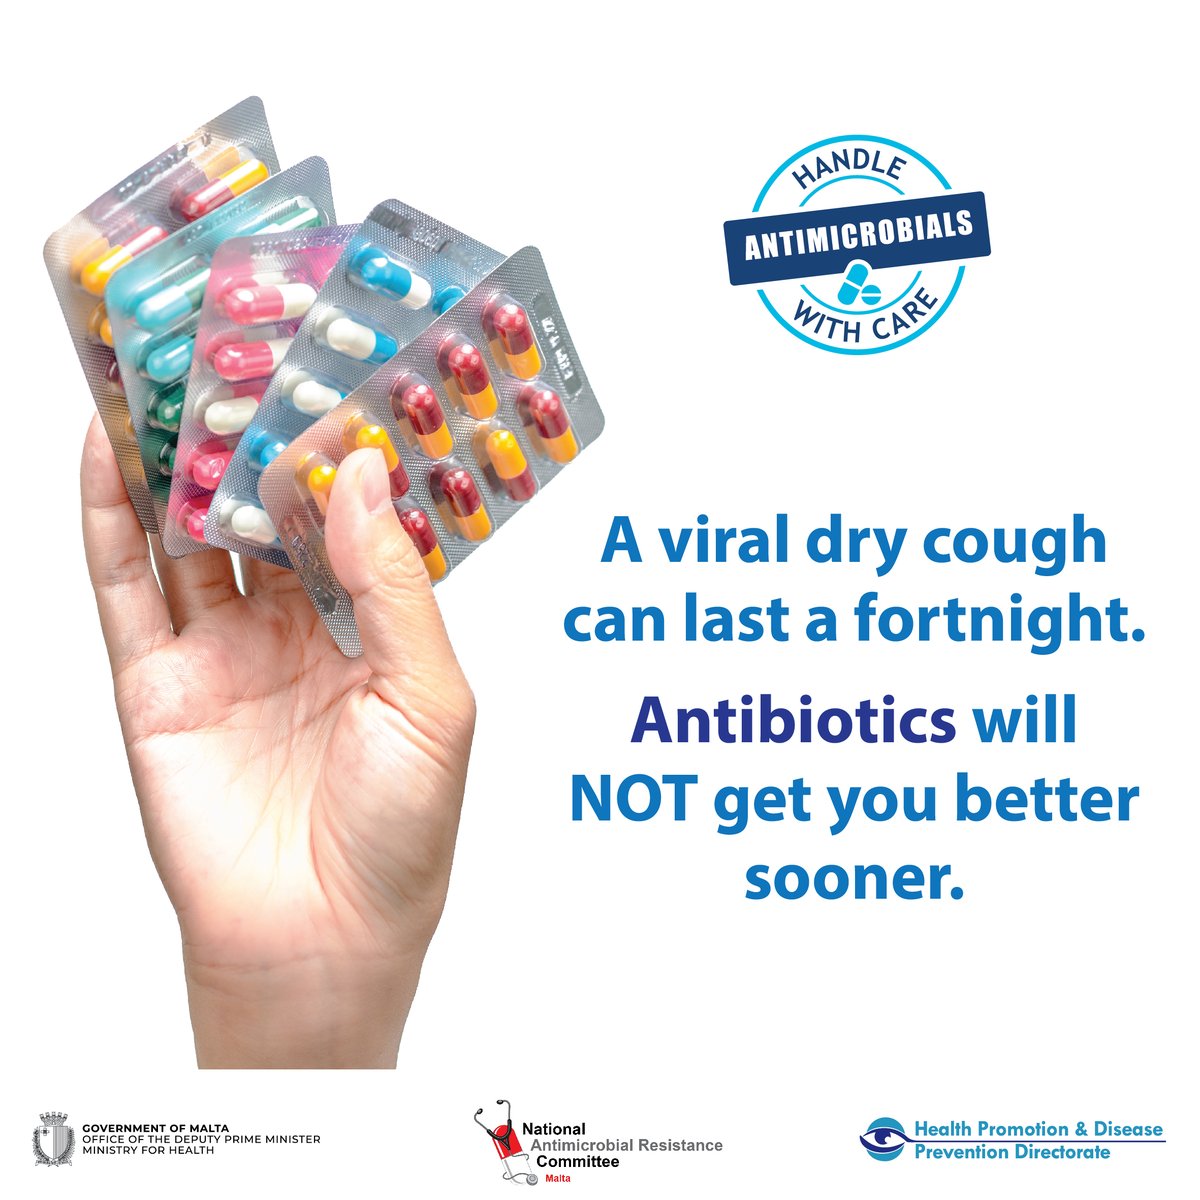 When you have a dry cough always take the prescribed medicine not antibiotics. 💊🧬 #WAAW2023 #Letsusethemwisely #HPDPMalta